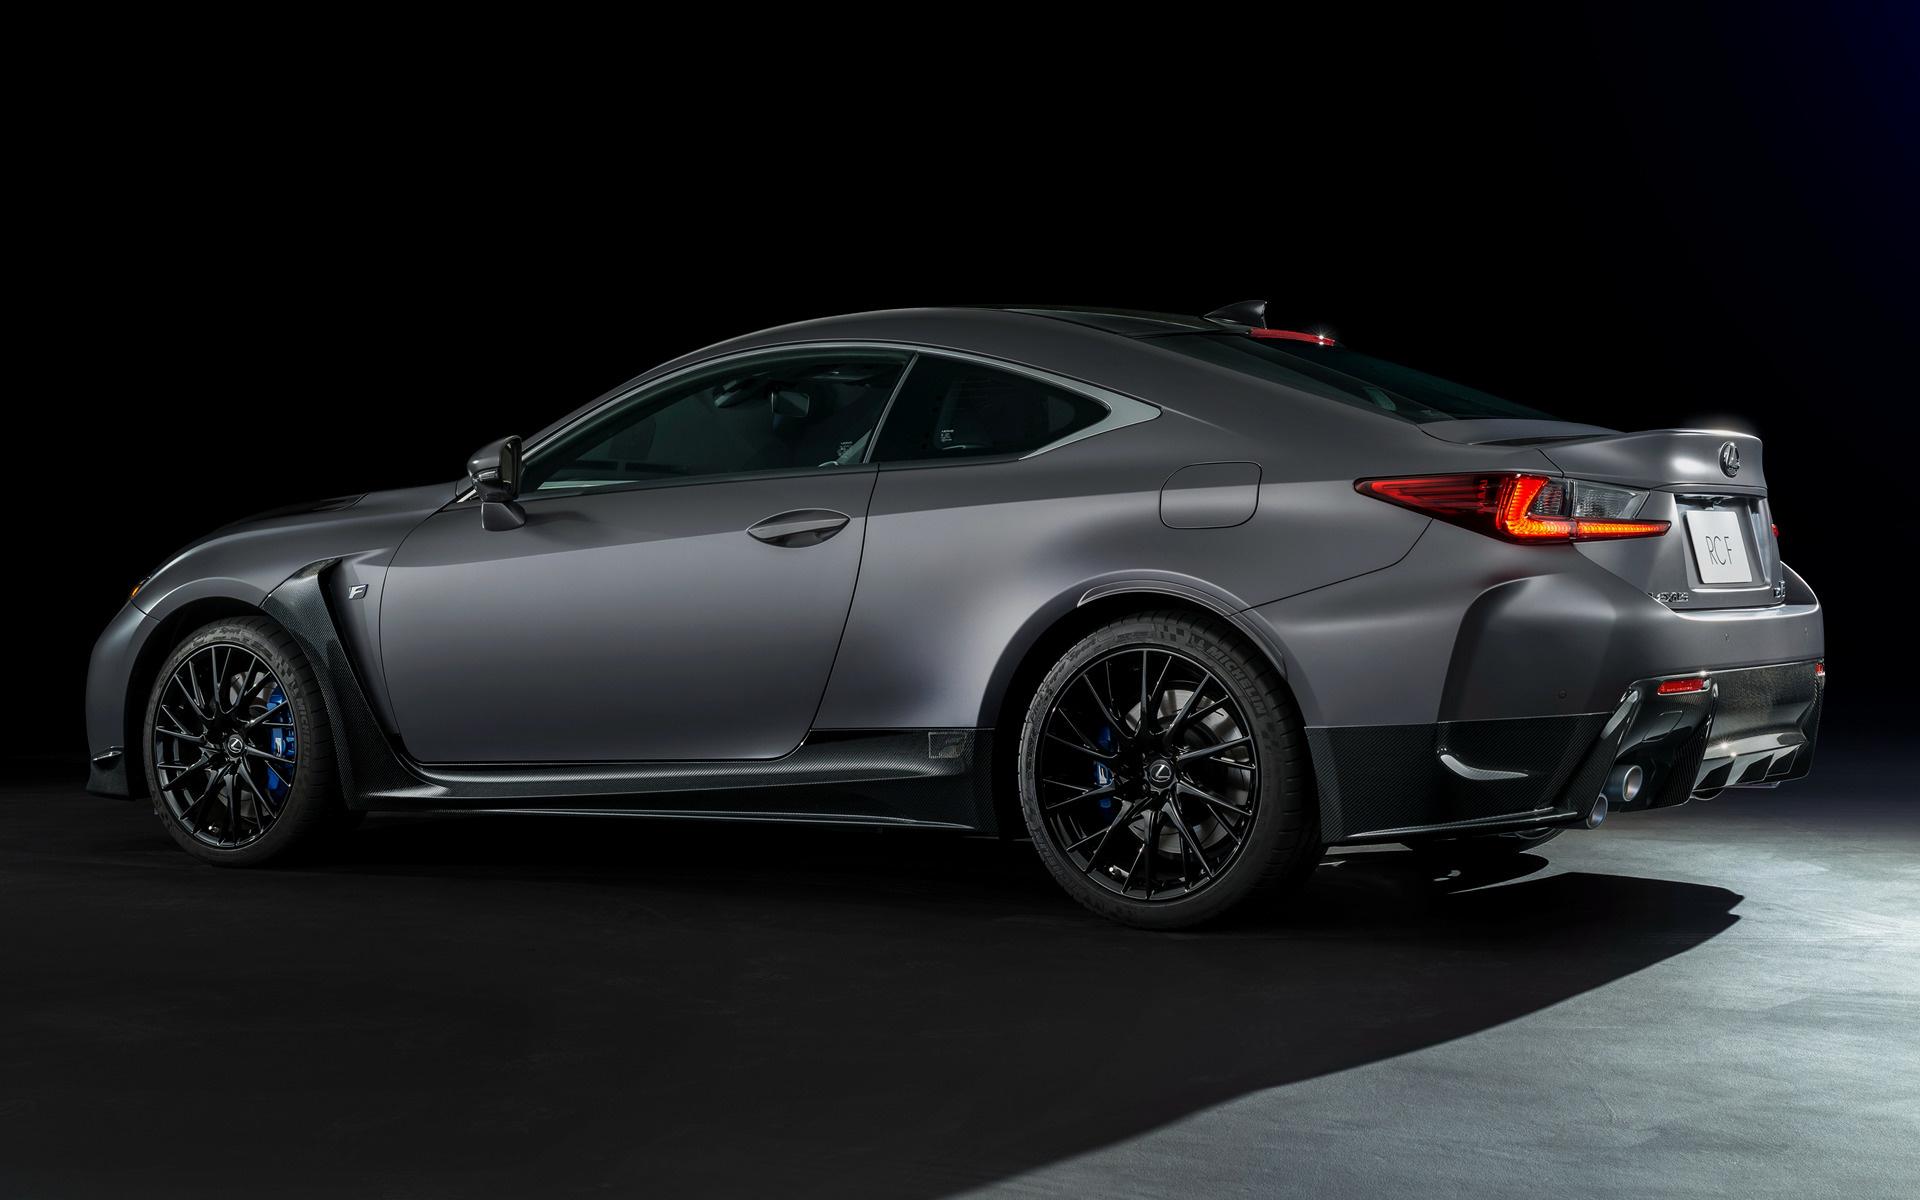 Lexus Rc F Track Edition Wallpapers